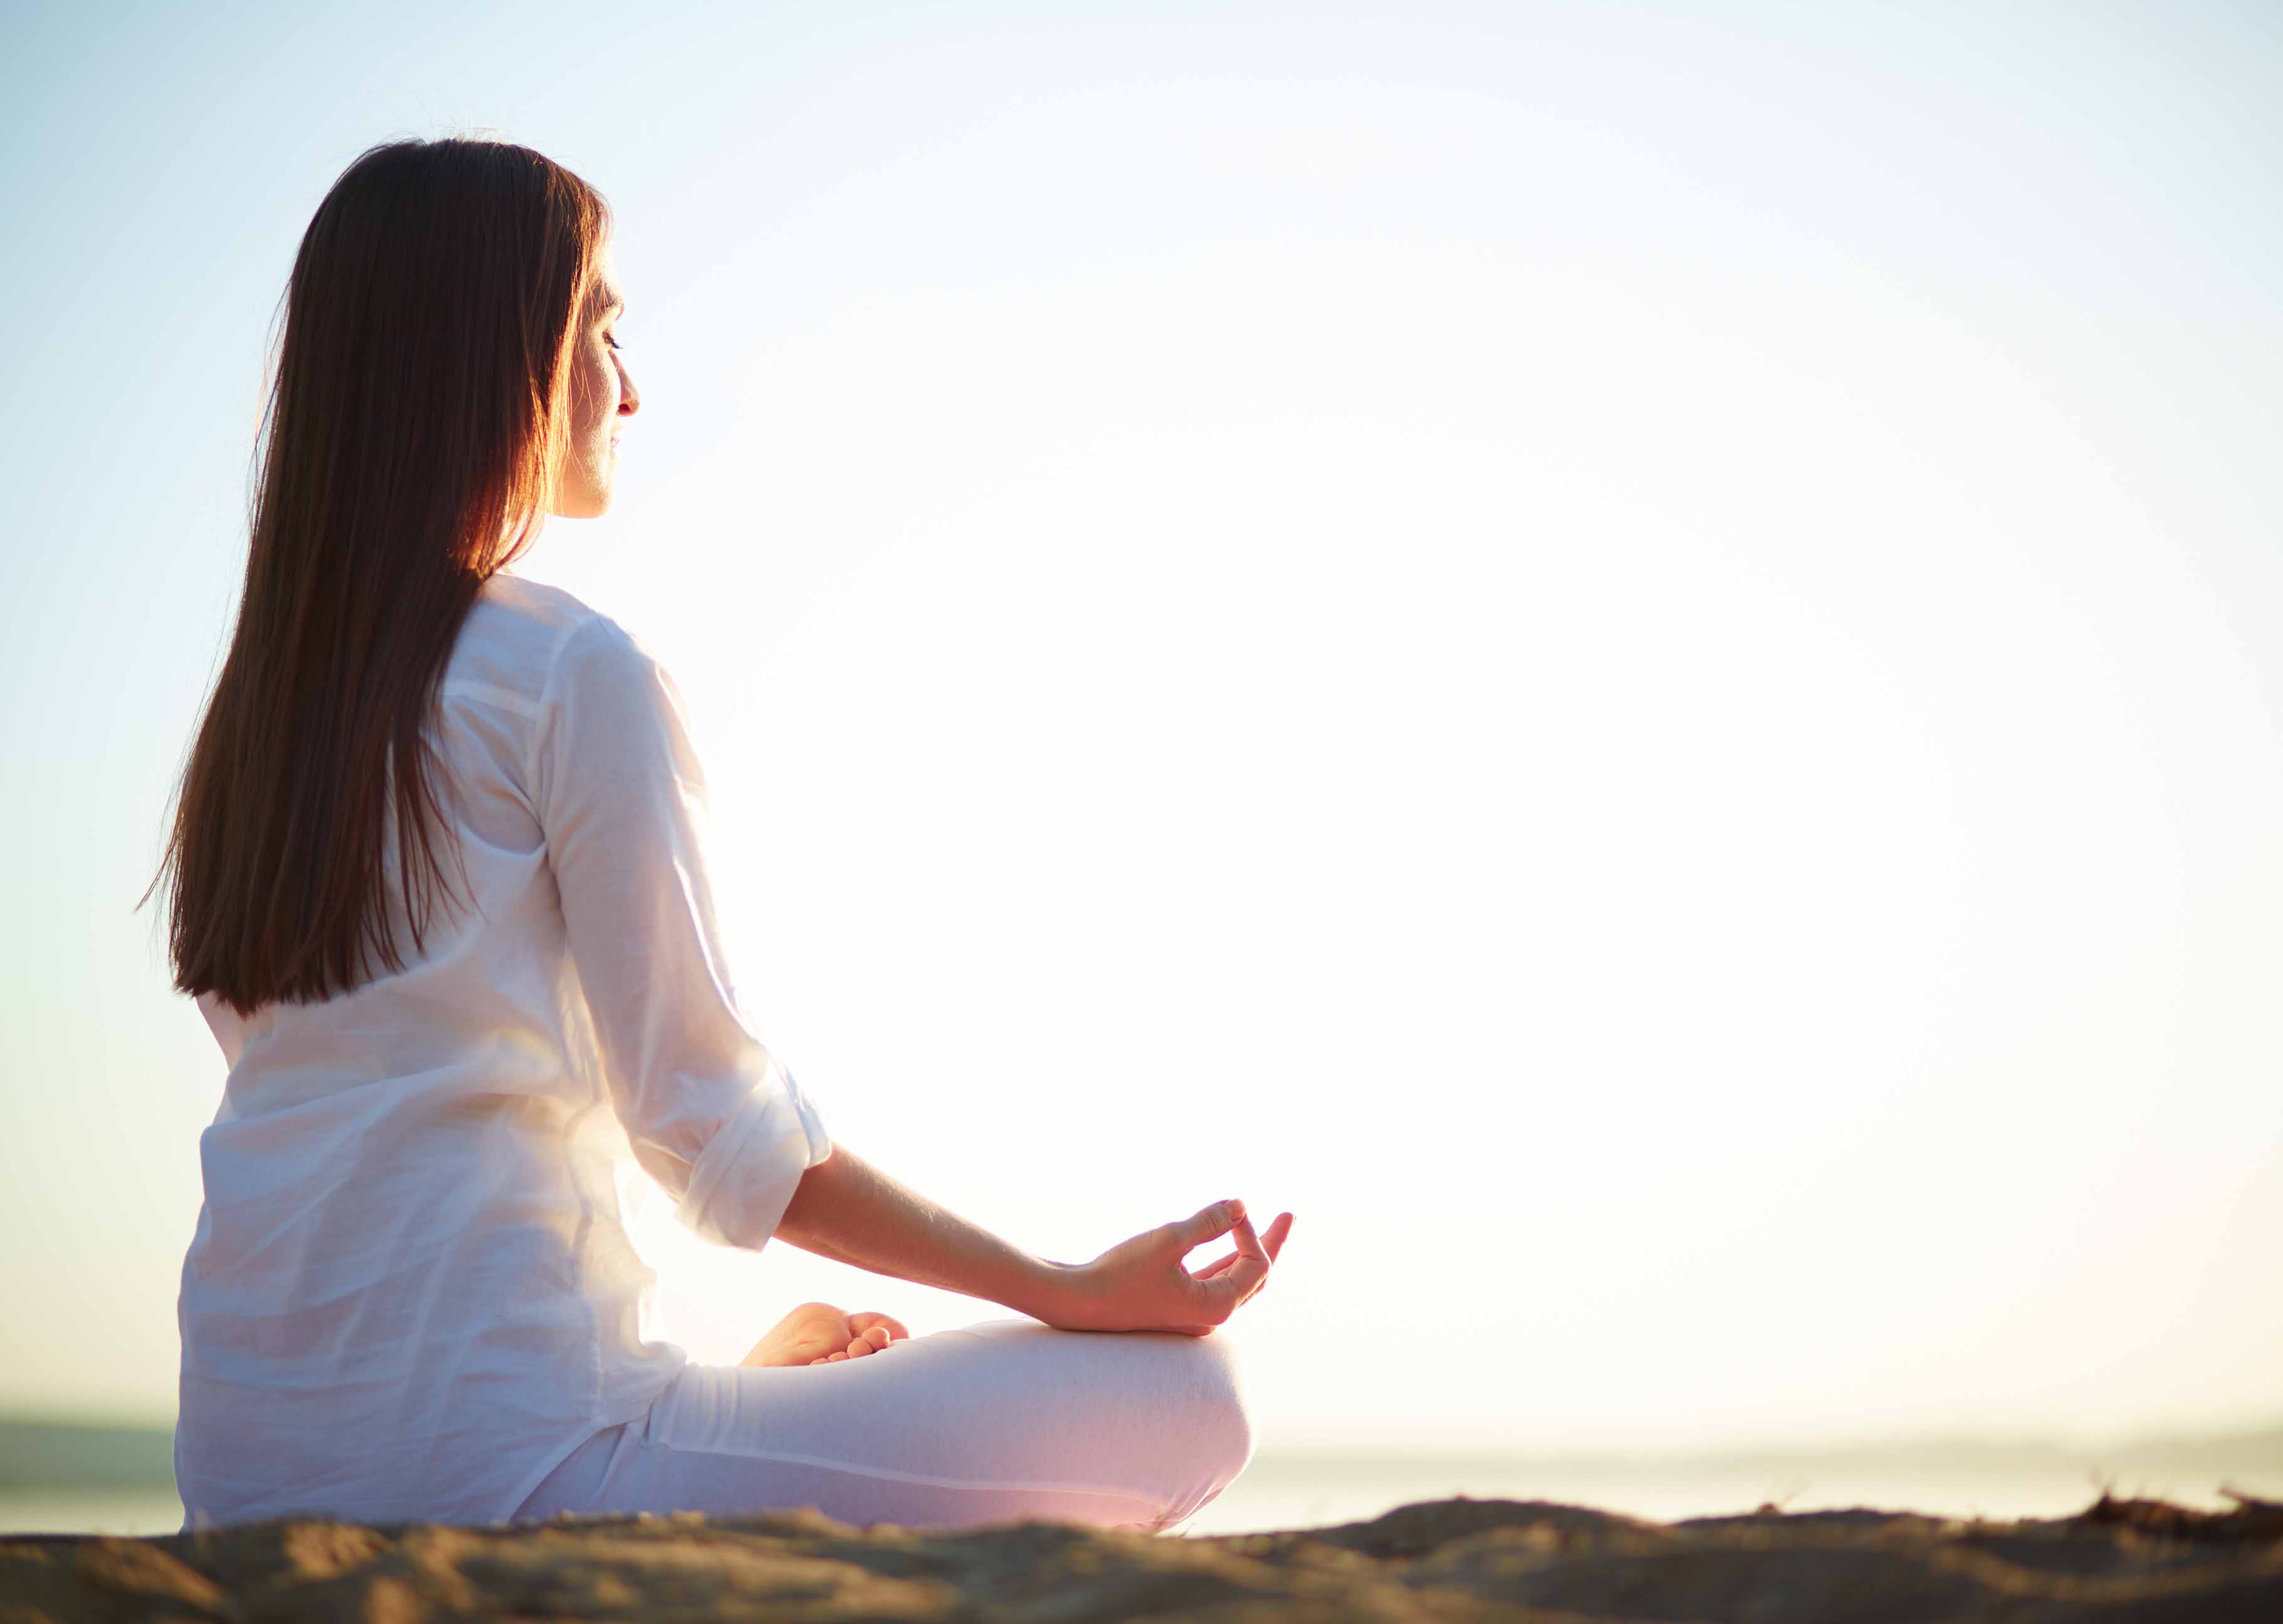 Woman in a white shirt meditating outdoors